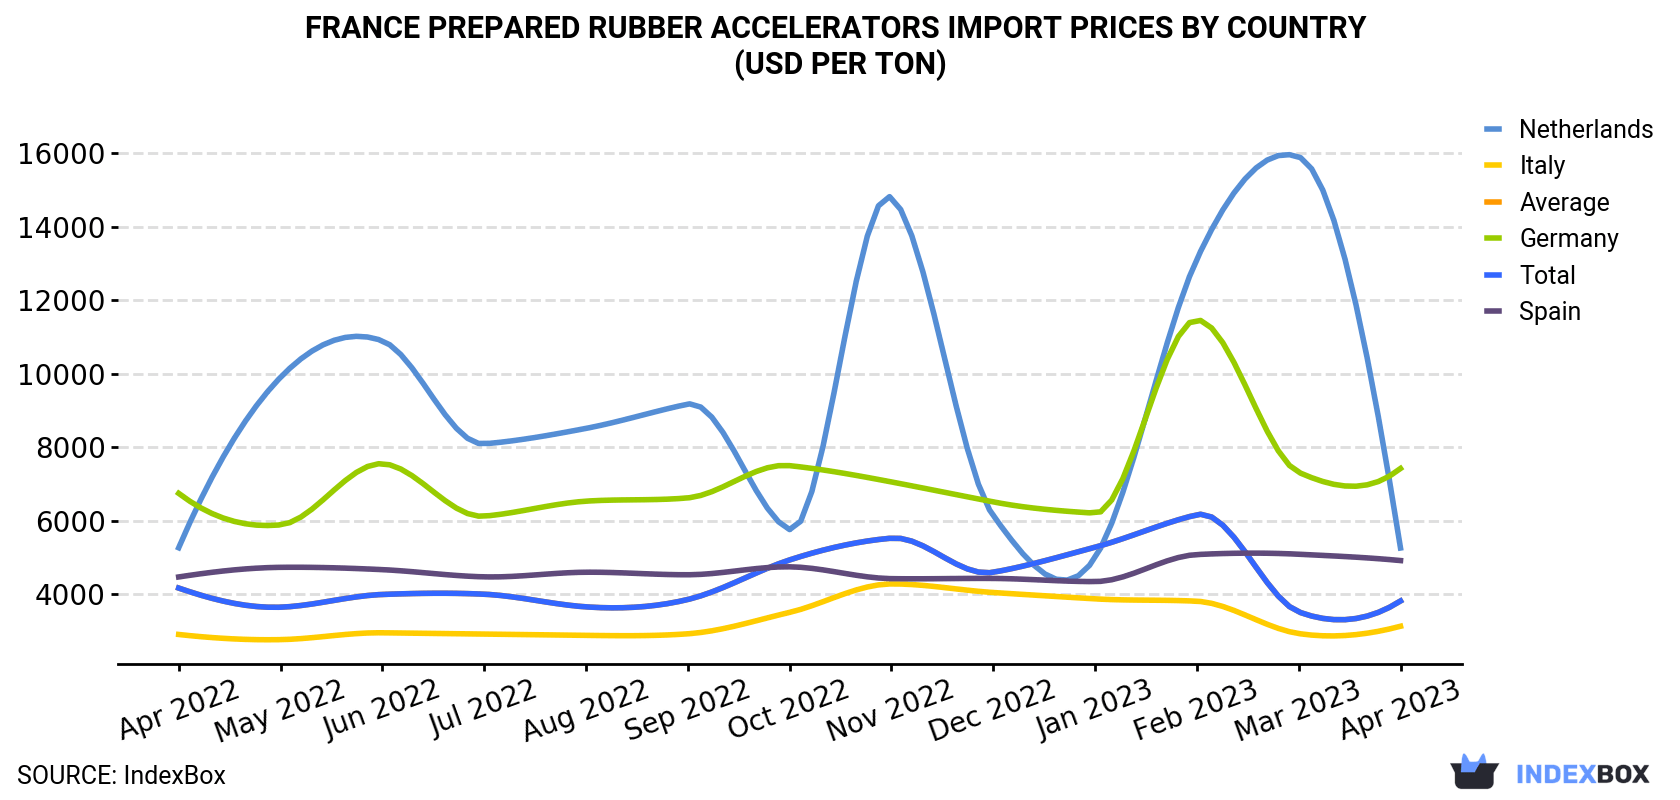 France Prepared Rubber Accelerators Import Prices By Country (USD Per Ton)